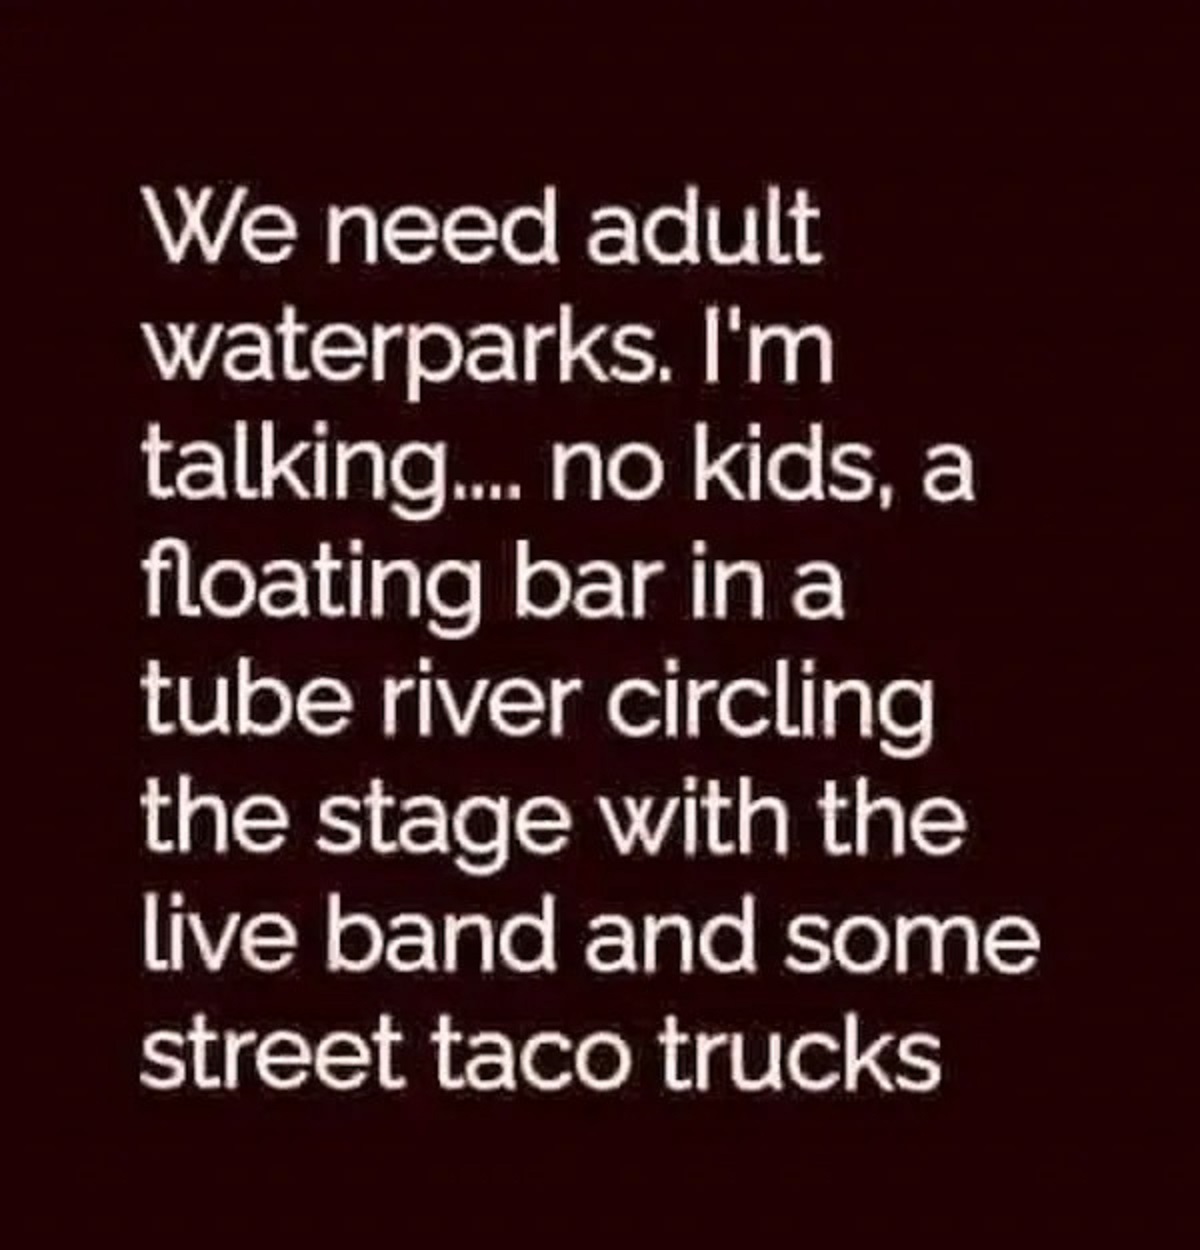 carmine - We need adult waterparks. I'm talking.... no kids, a floating bar in a tube river circling the stage with the live band and some street taco trucks